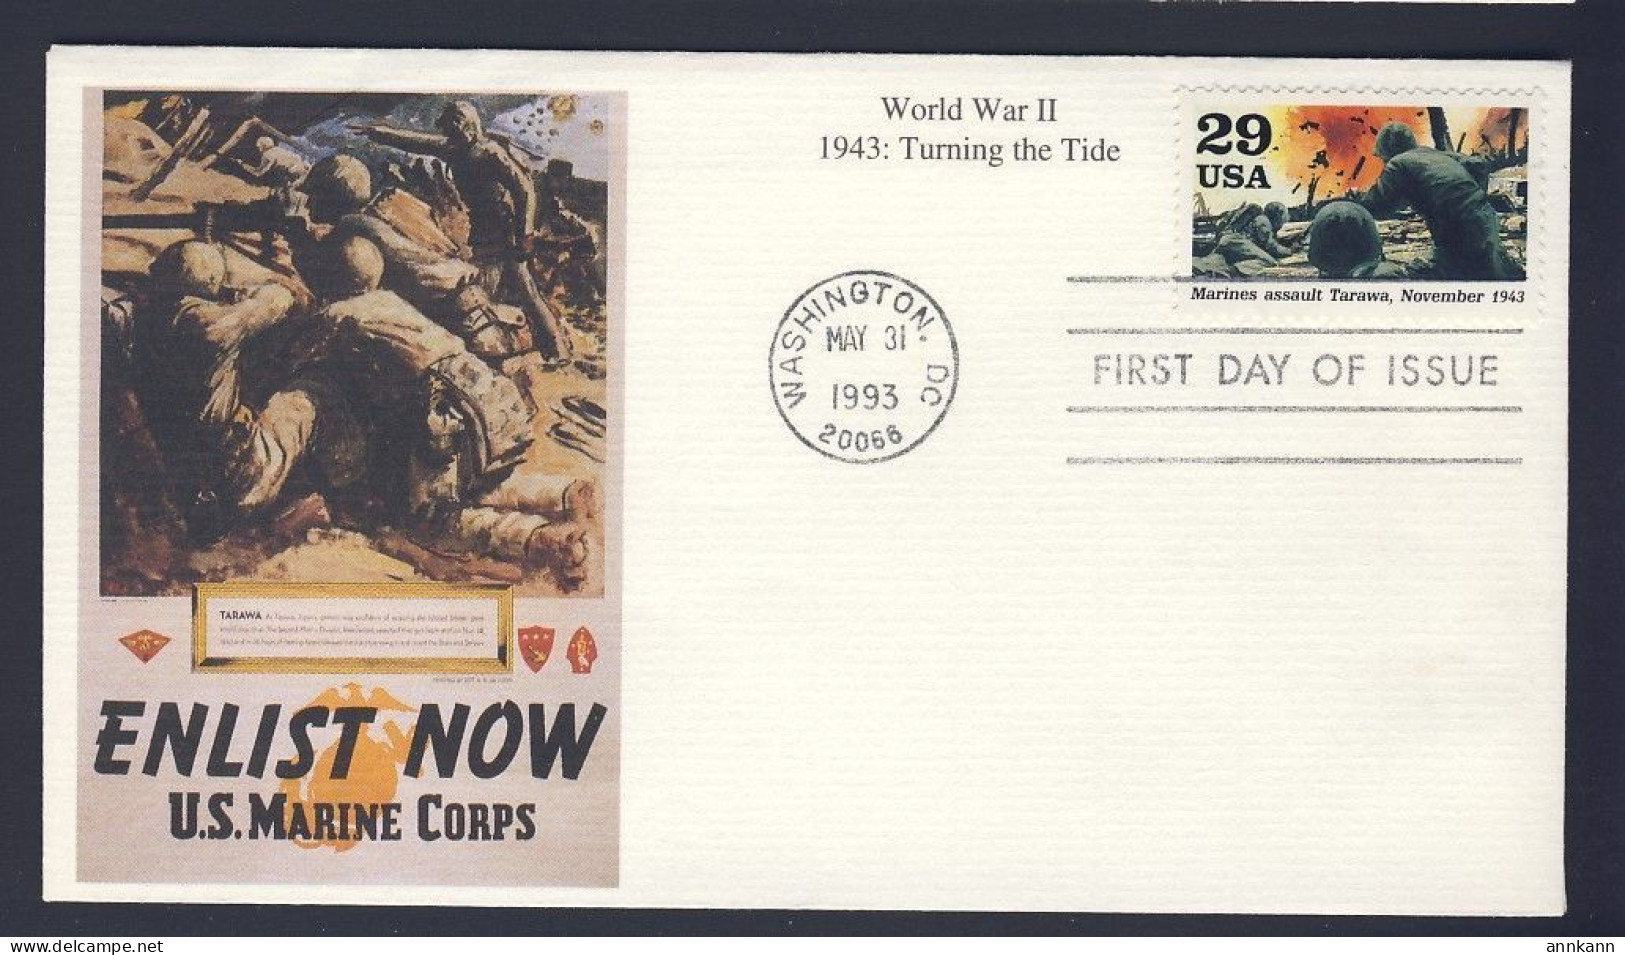 USA POSTAL HISTORY - 1993 - WWII 1943 Turning The Tide - FDC Cover - MARINES - 1991-2000